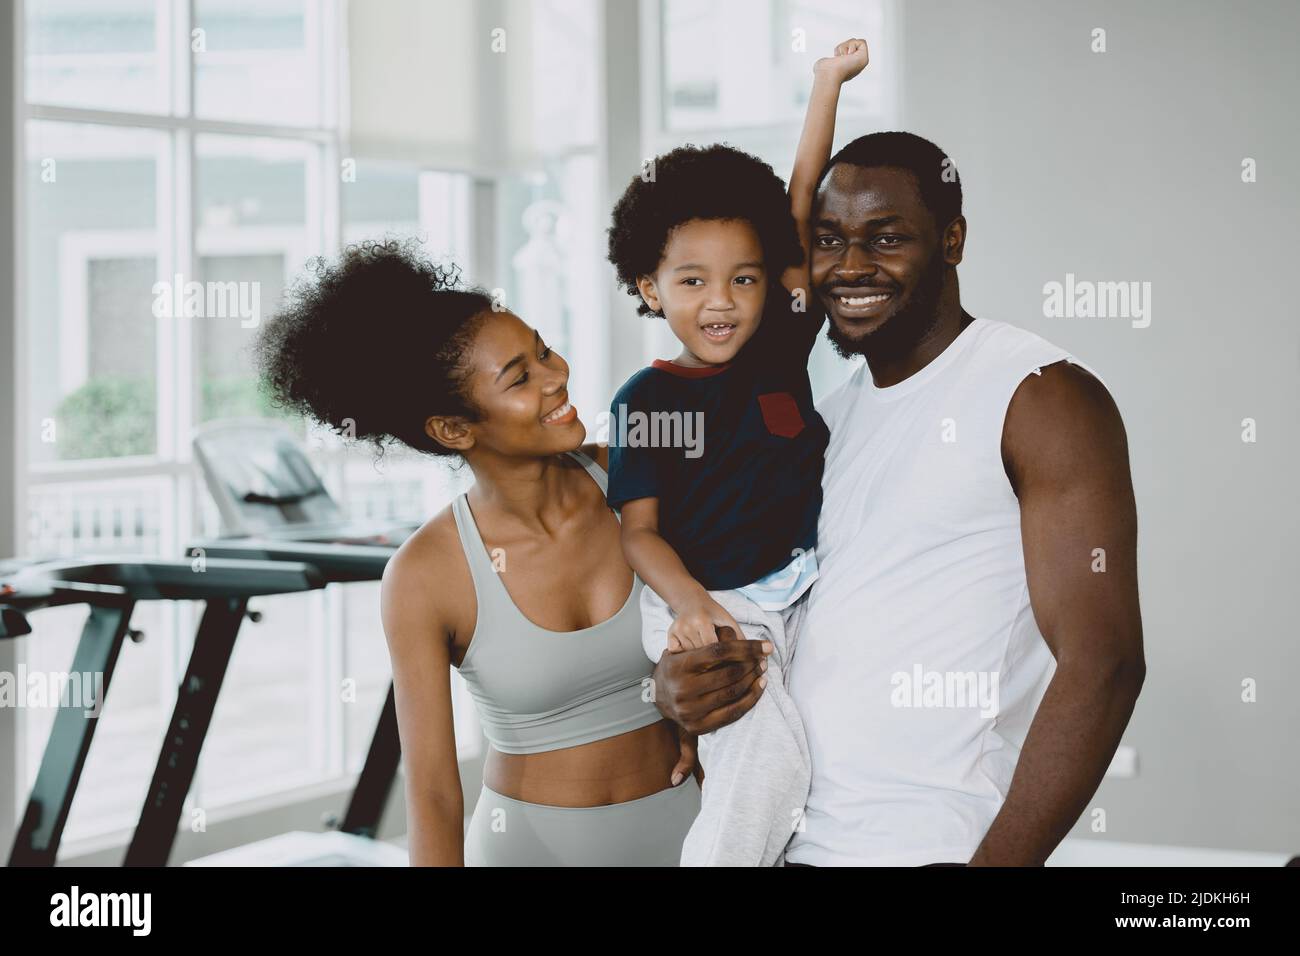 black family people with young mother and son happy healthcare together at fitness sport club. Stock Photo